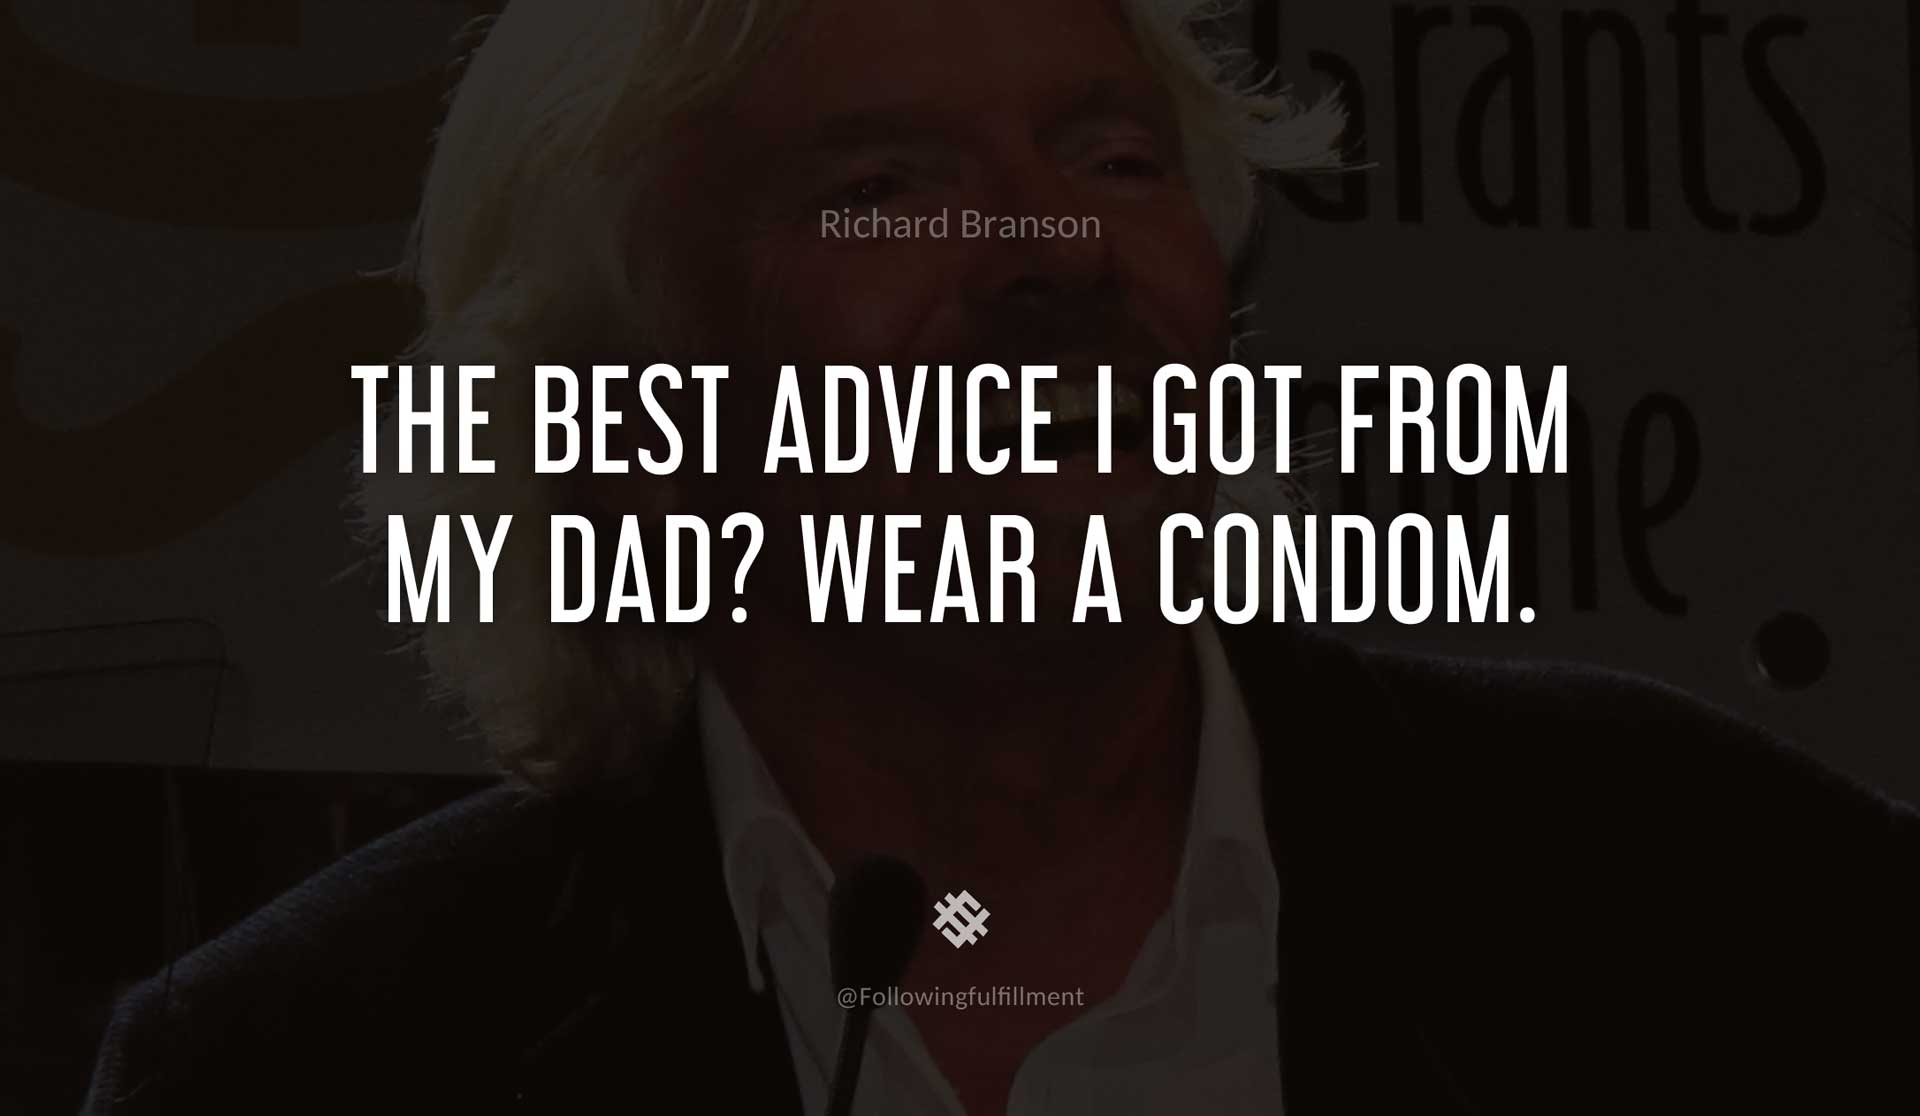 The-best-advice-I-got-from-my-dad--Wear-a-condom.-RICHARD-BRANSON-Quote.jpg